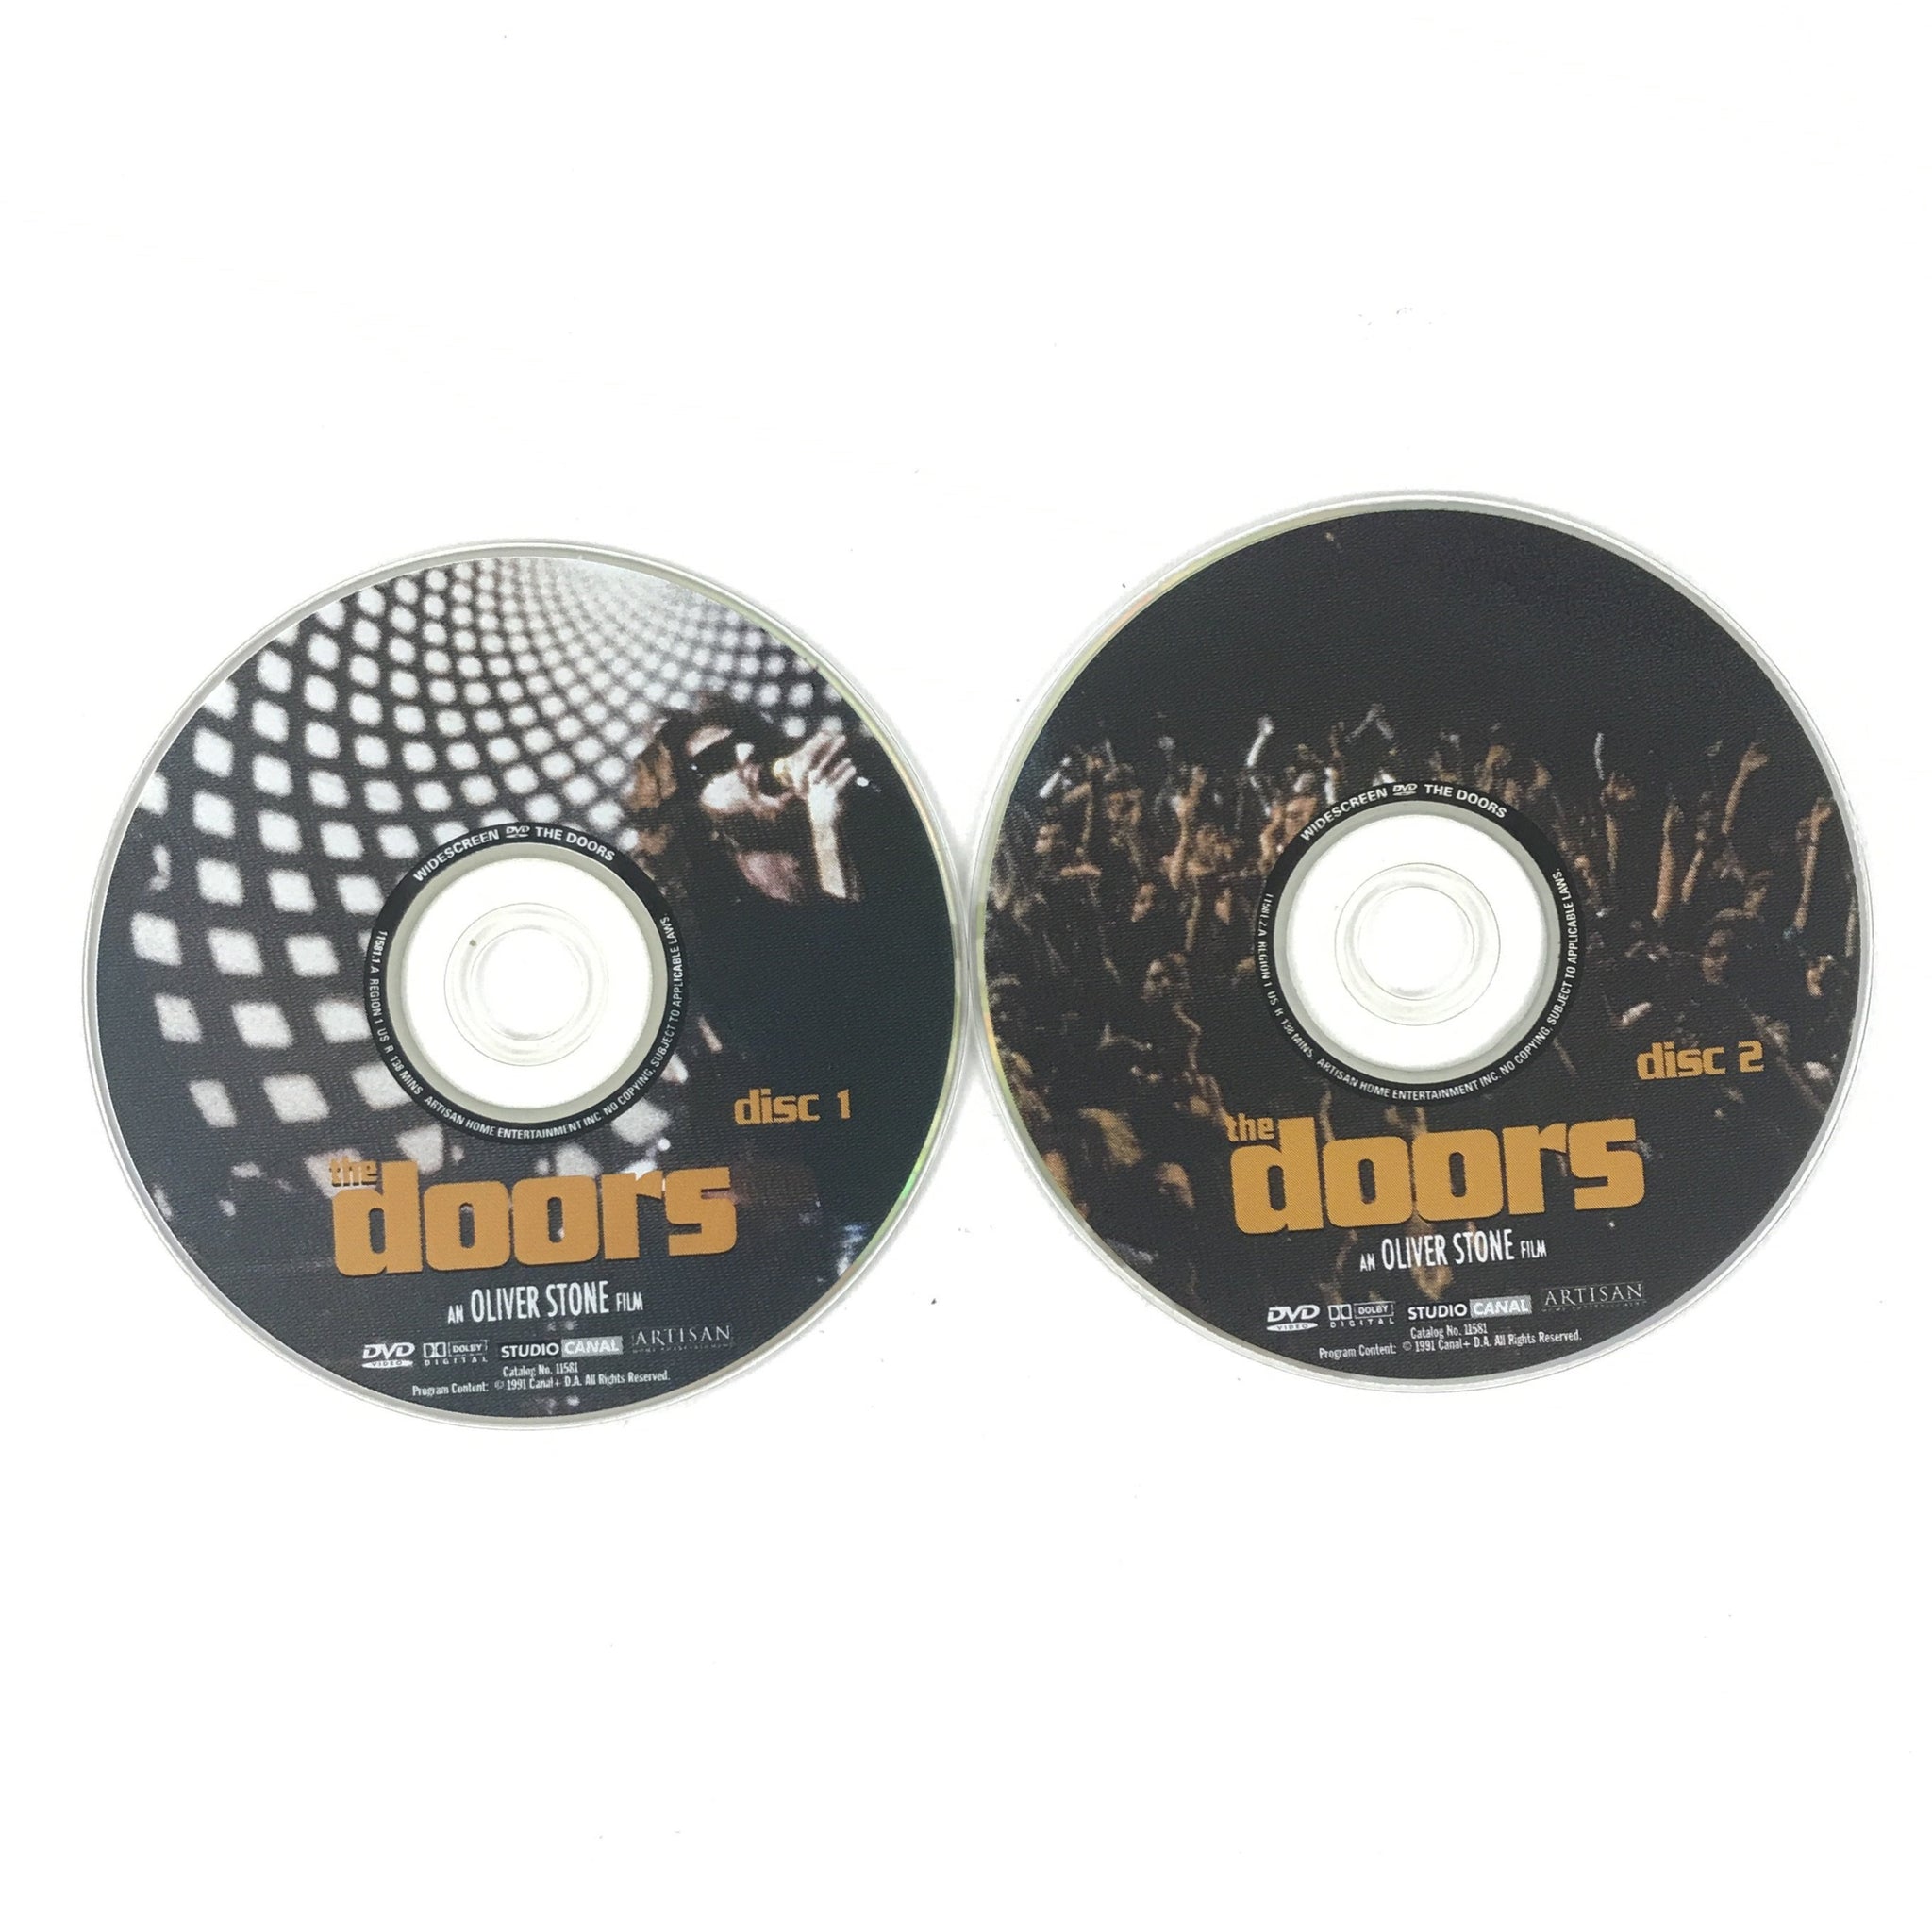 The Doors (DVD, 2001, 2-Disc Set, Special Edition) Oliver Stone - DISCS ONLY